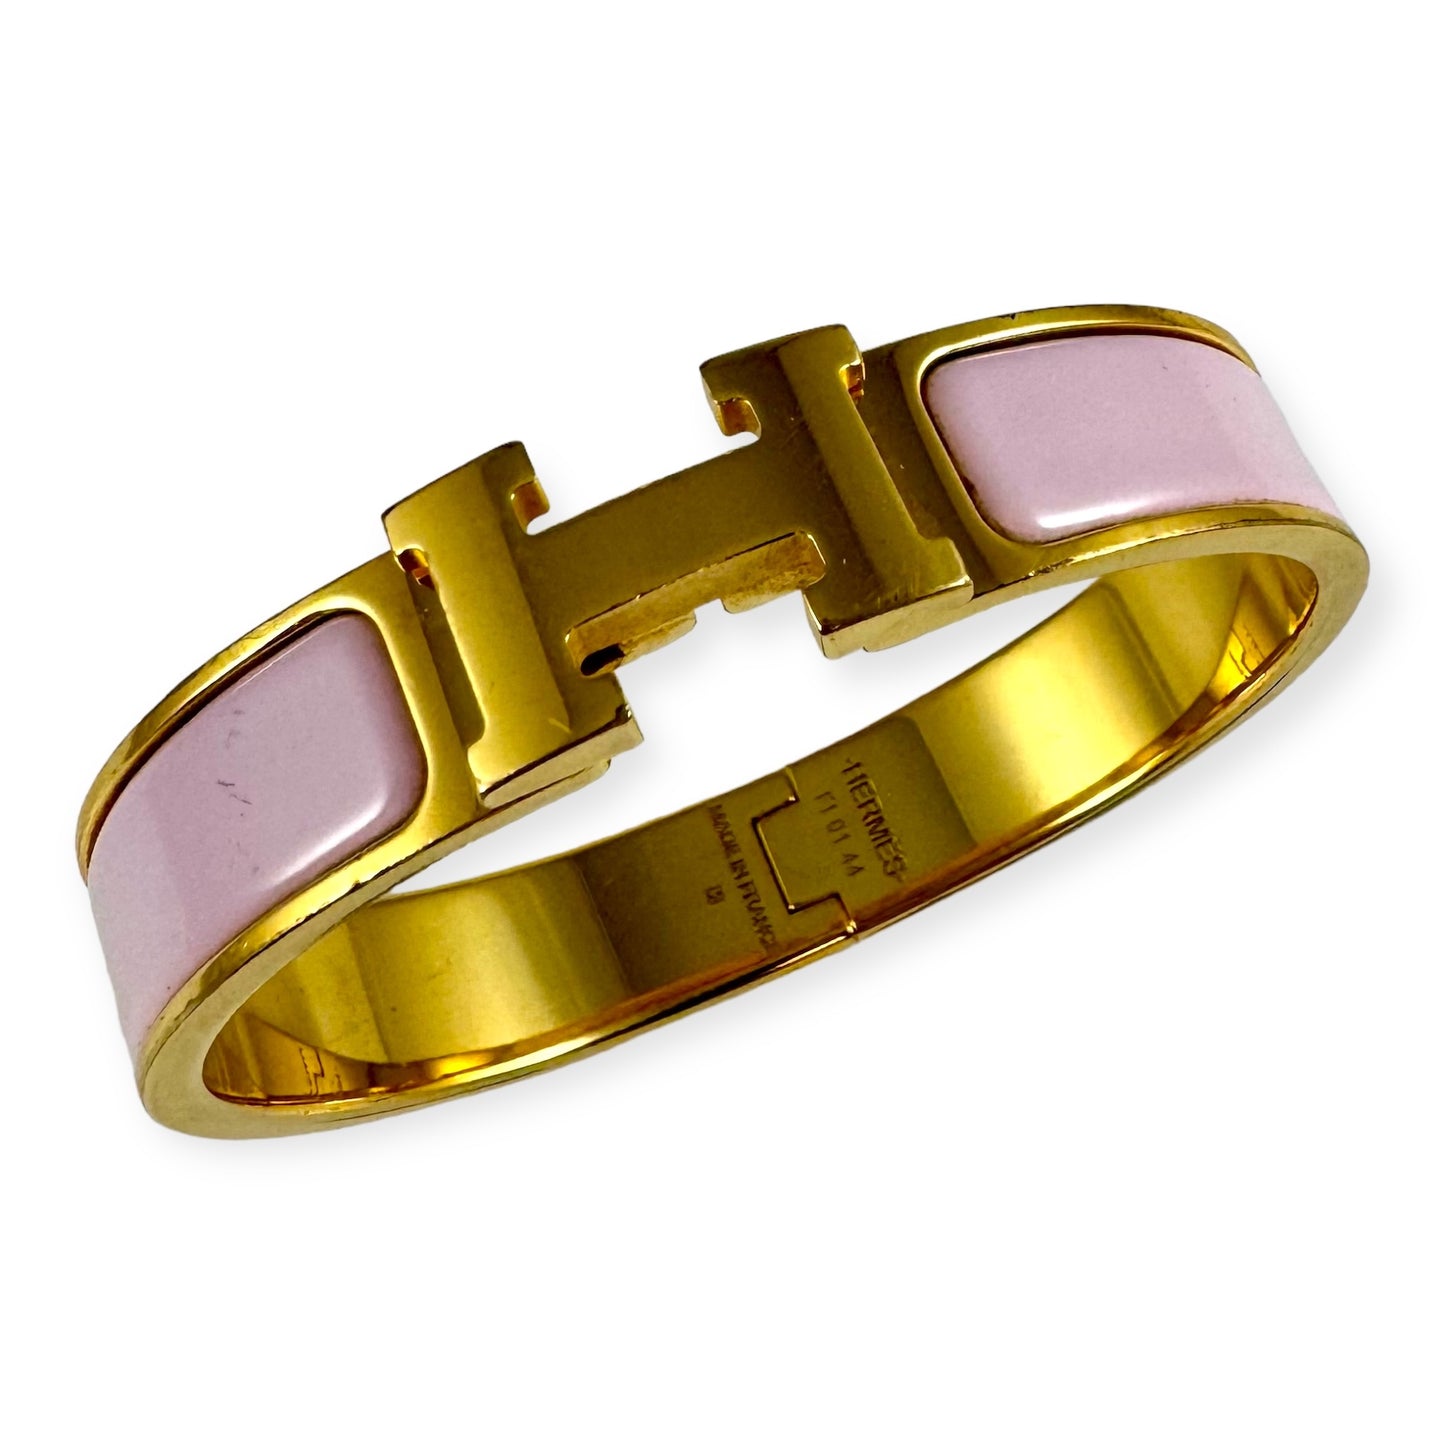 HERMES Clic H Bracelet in Pink | Size Small